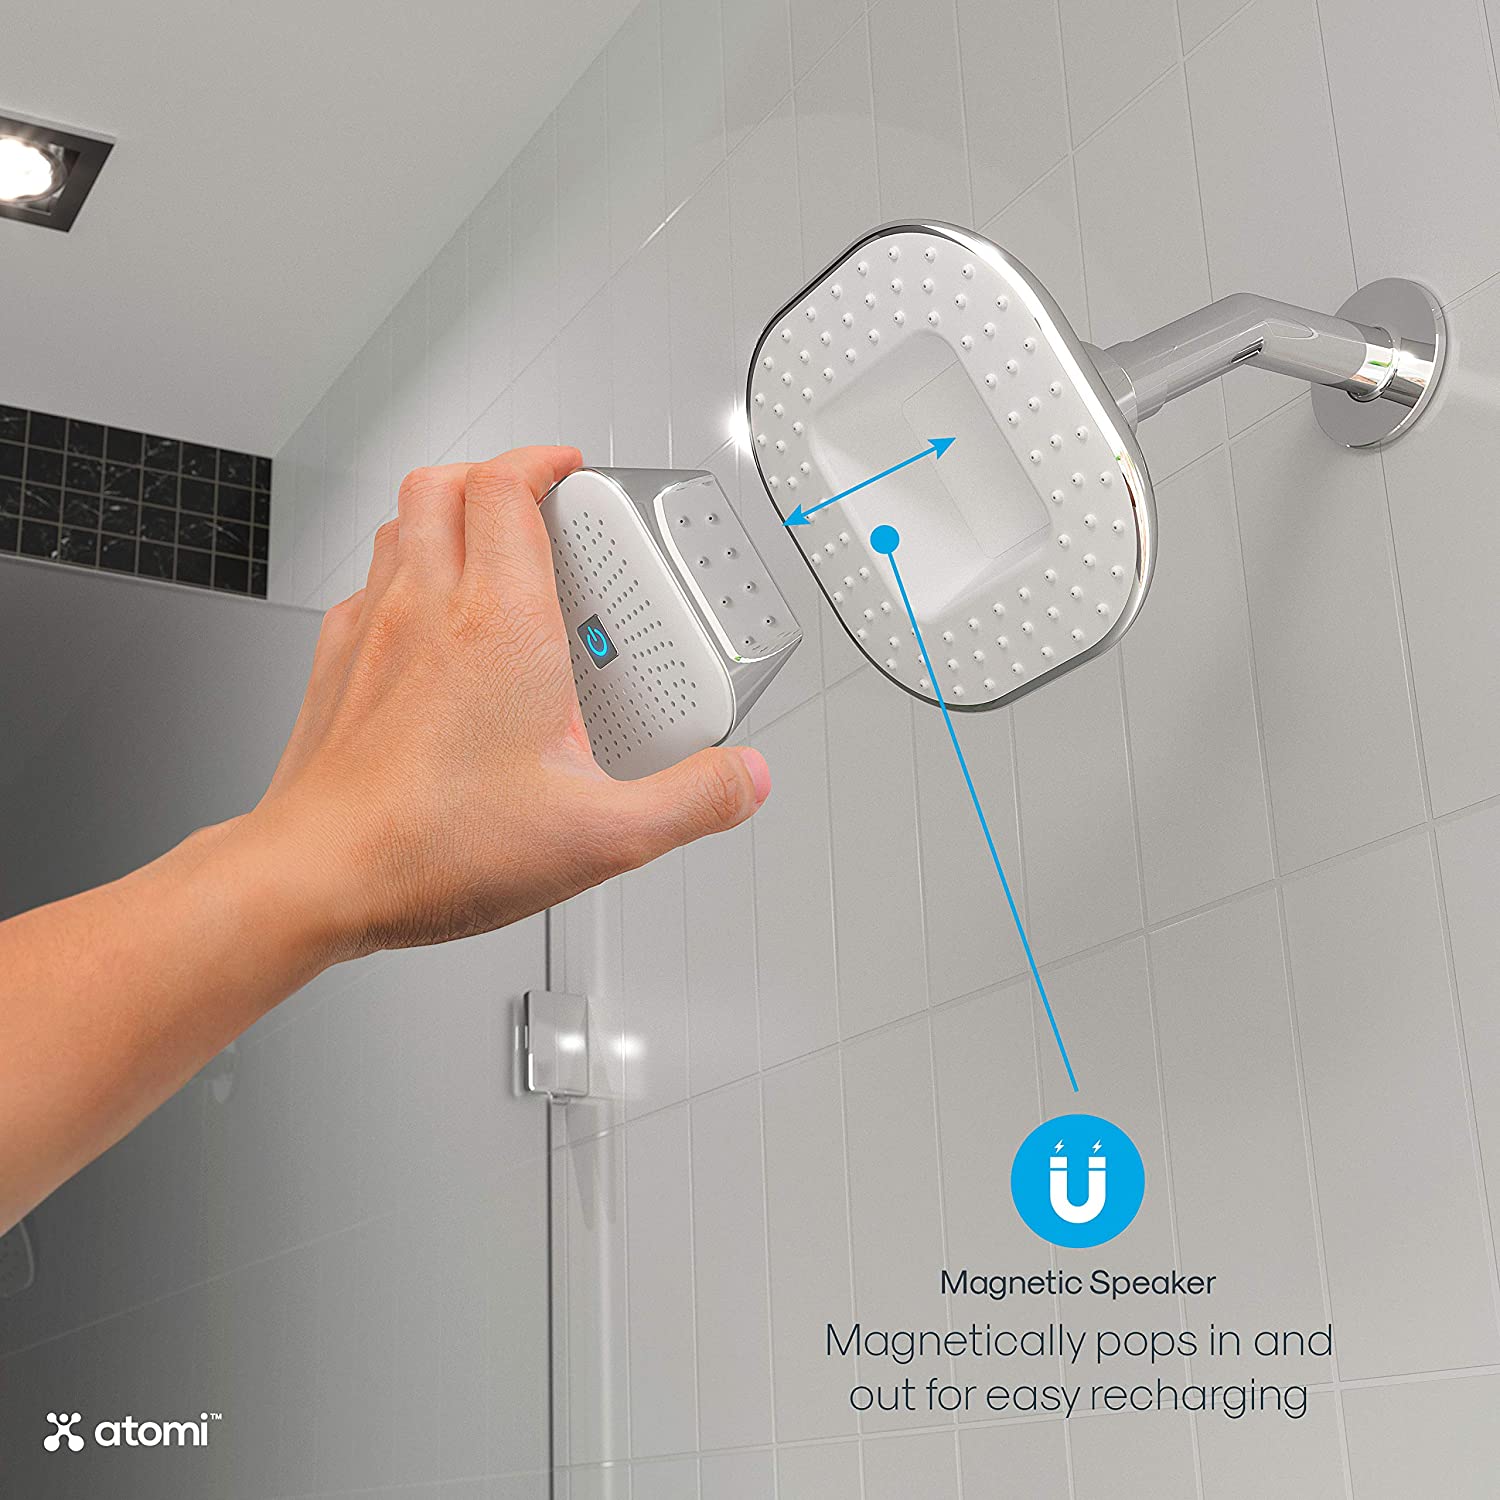 Atomi 4.9” White Showerhead With Removable, Magnetic Bluetooth Speaker – AT1490, 1 Pk - image 6 of 8